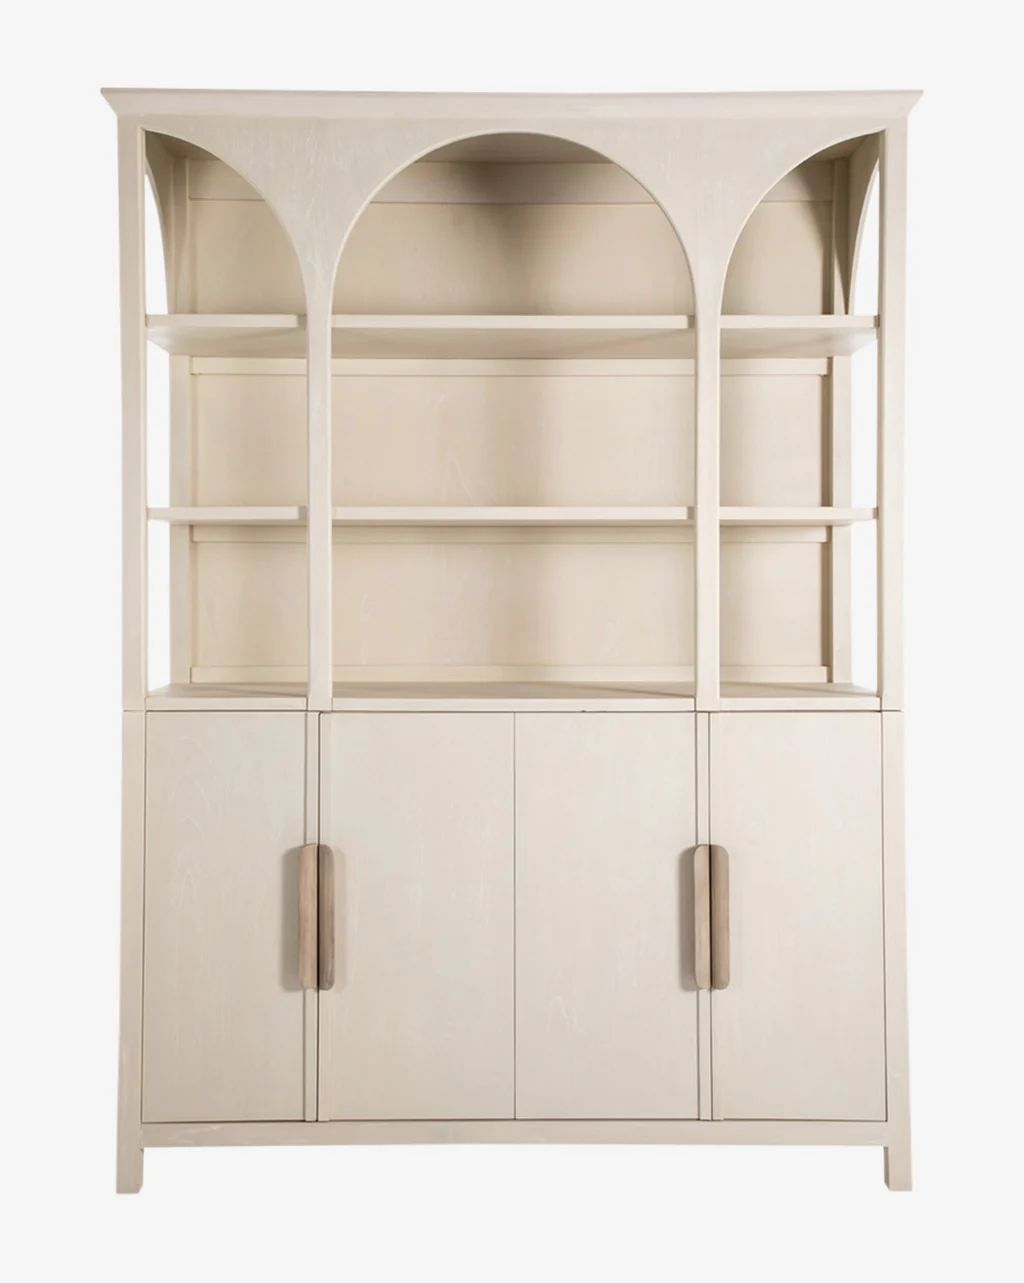 Foster Cabinet | McGee & Co.